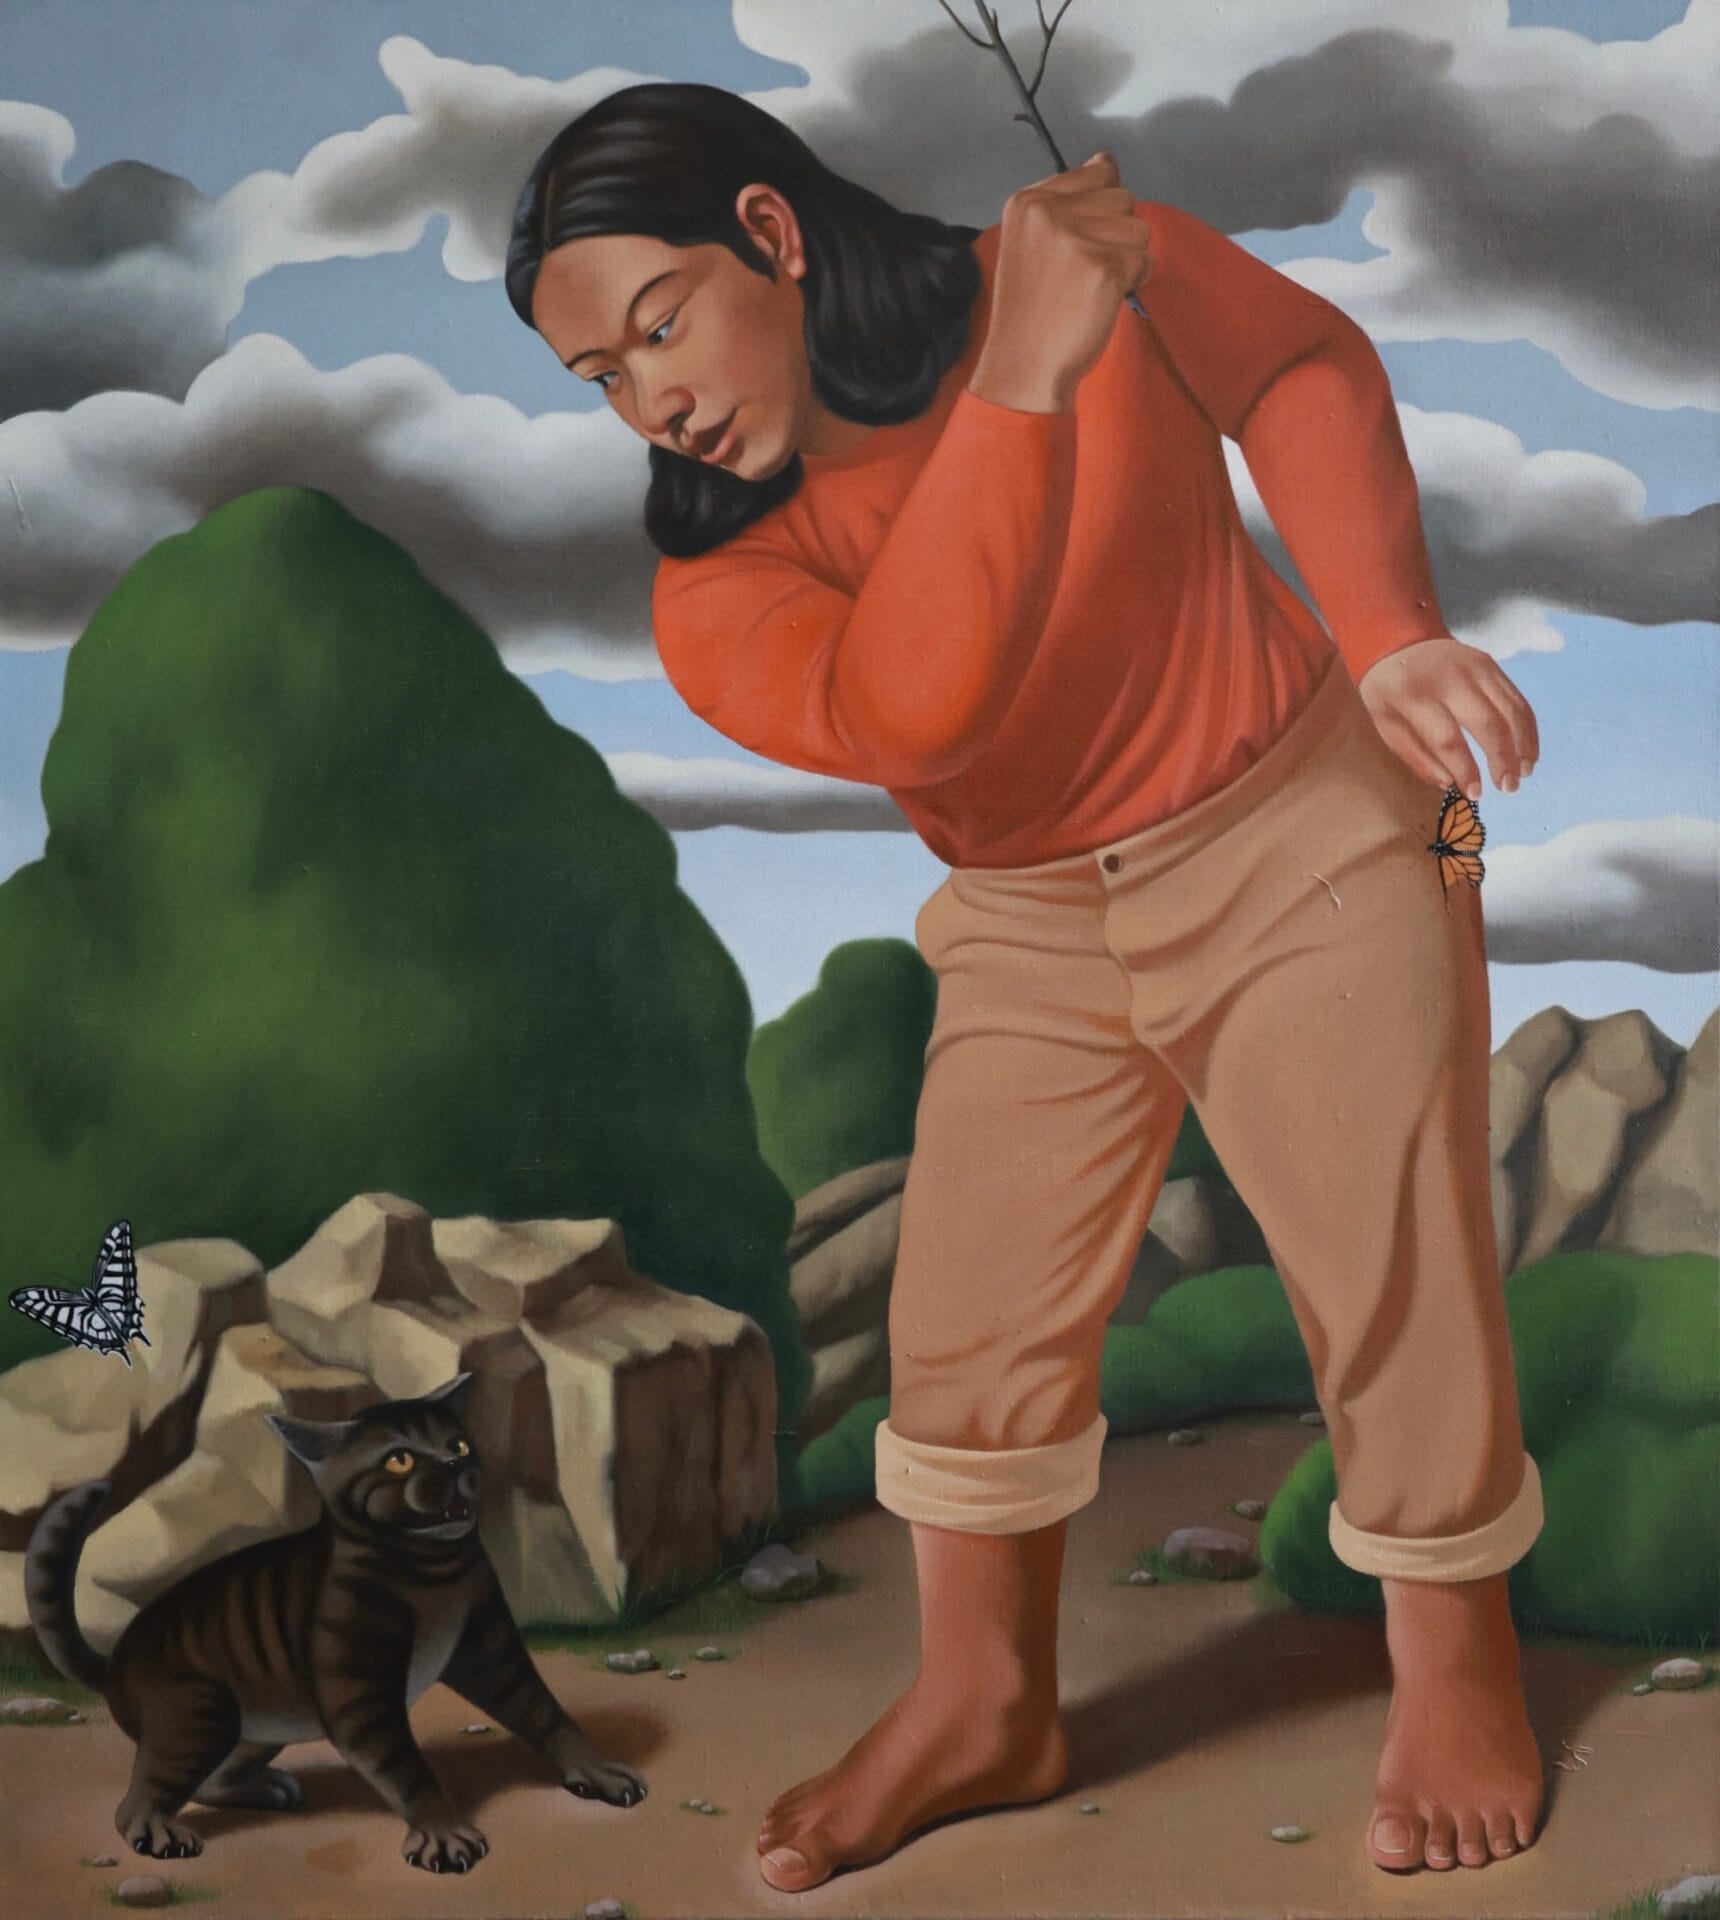 a man with long hair, an orange long-sleeve shirt, and rolled up tan pants grips a twig as if to hit a striped cat near a butterfly